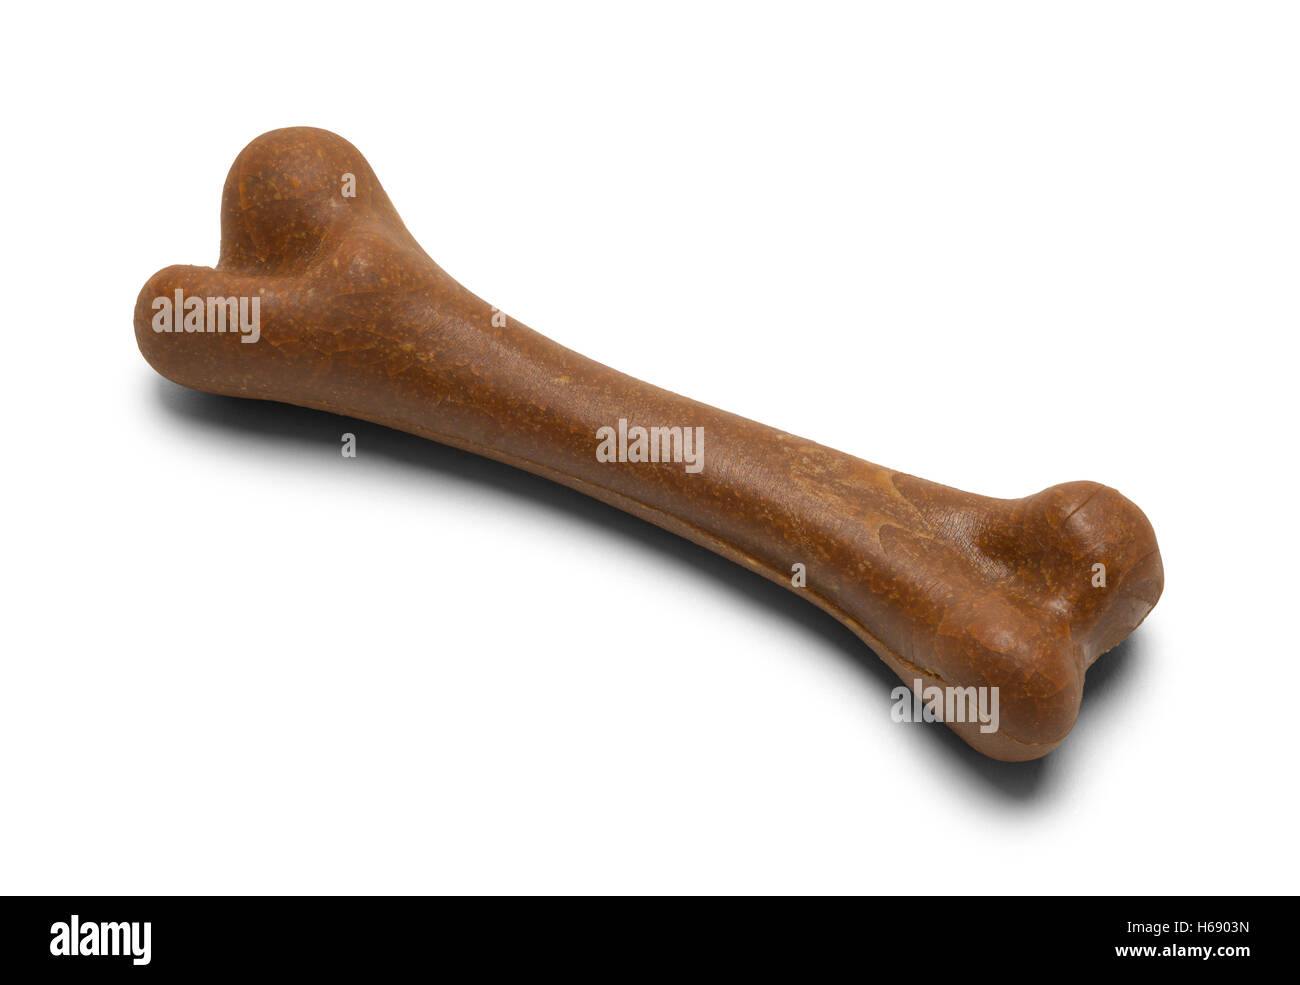 Single Brown Chewy Dog Bone Isolated on White Background. Stock Photo